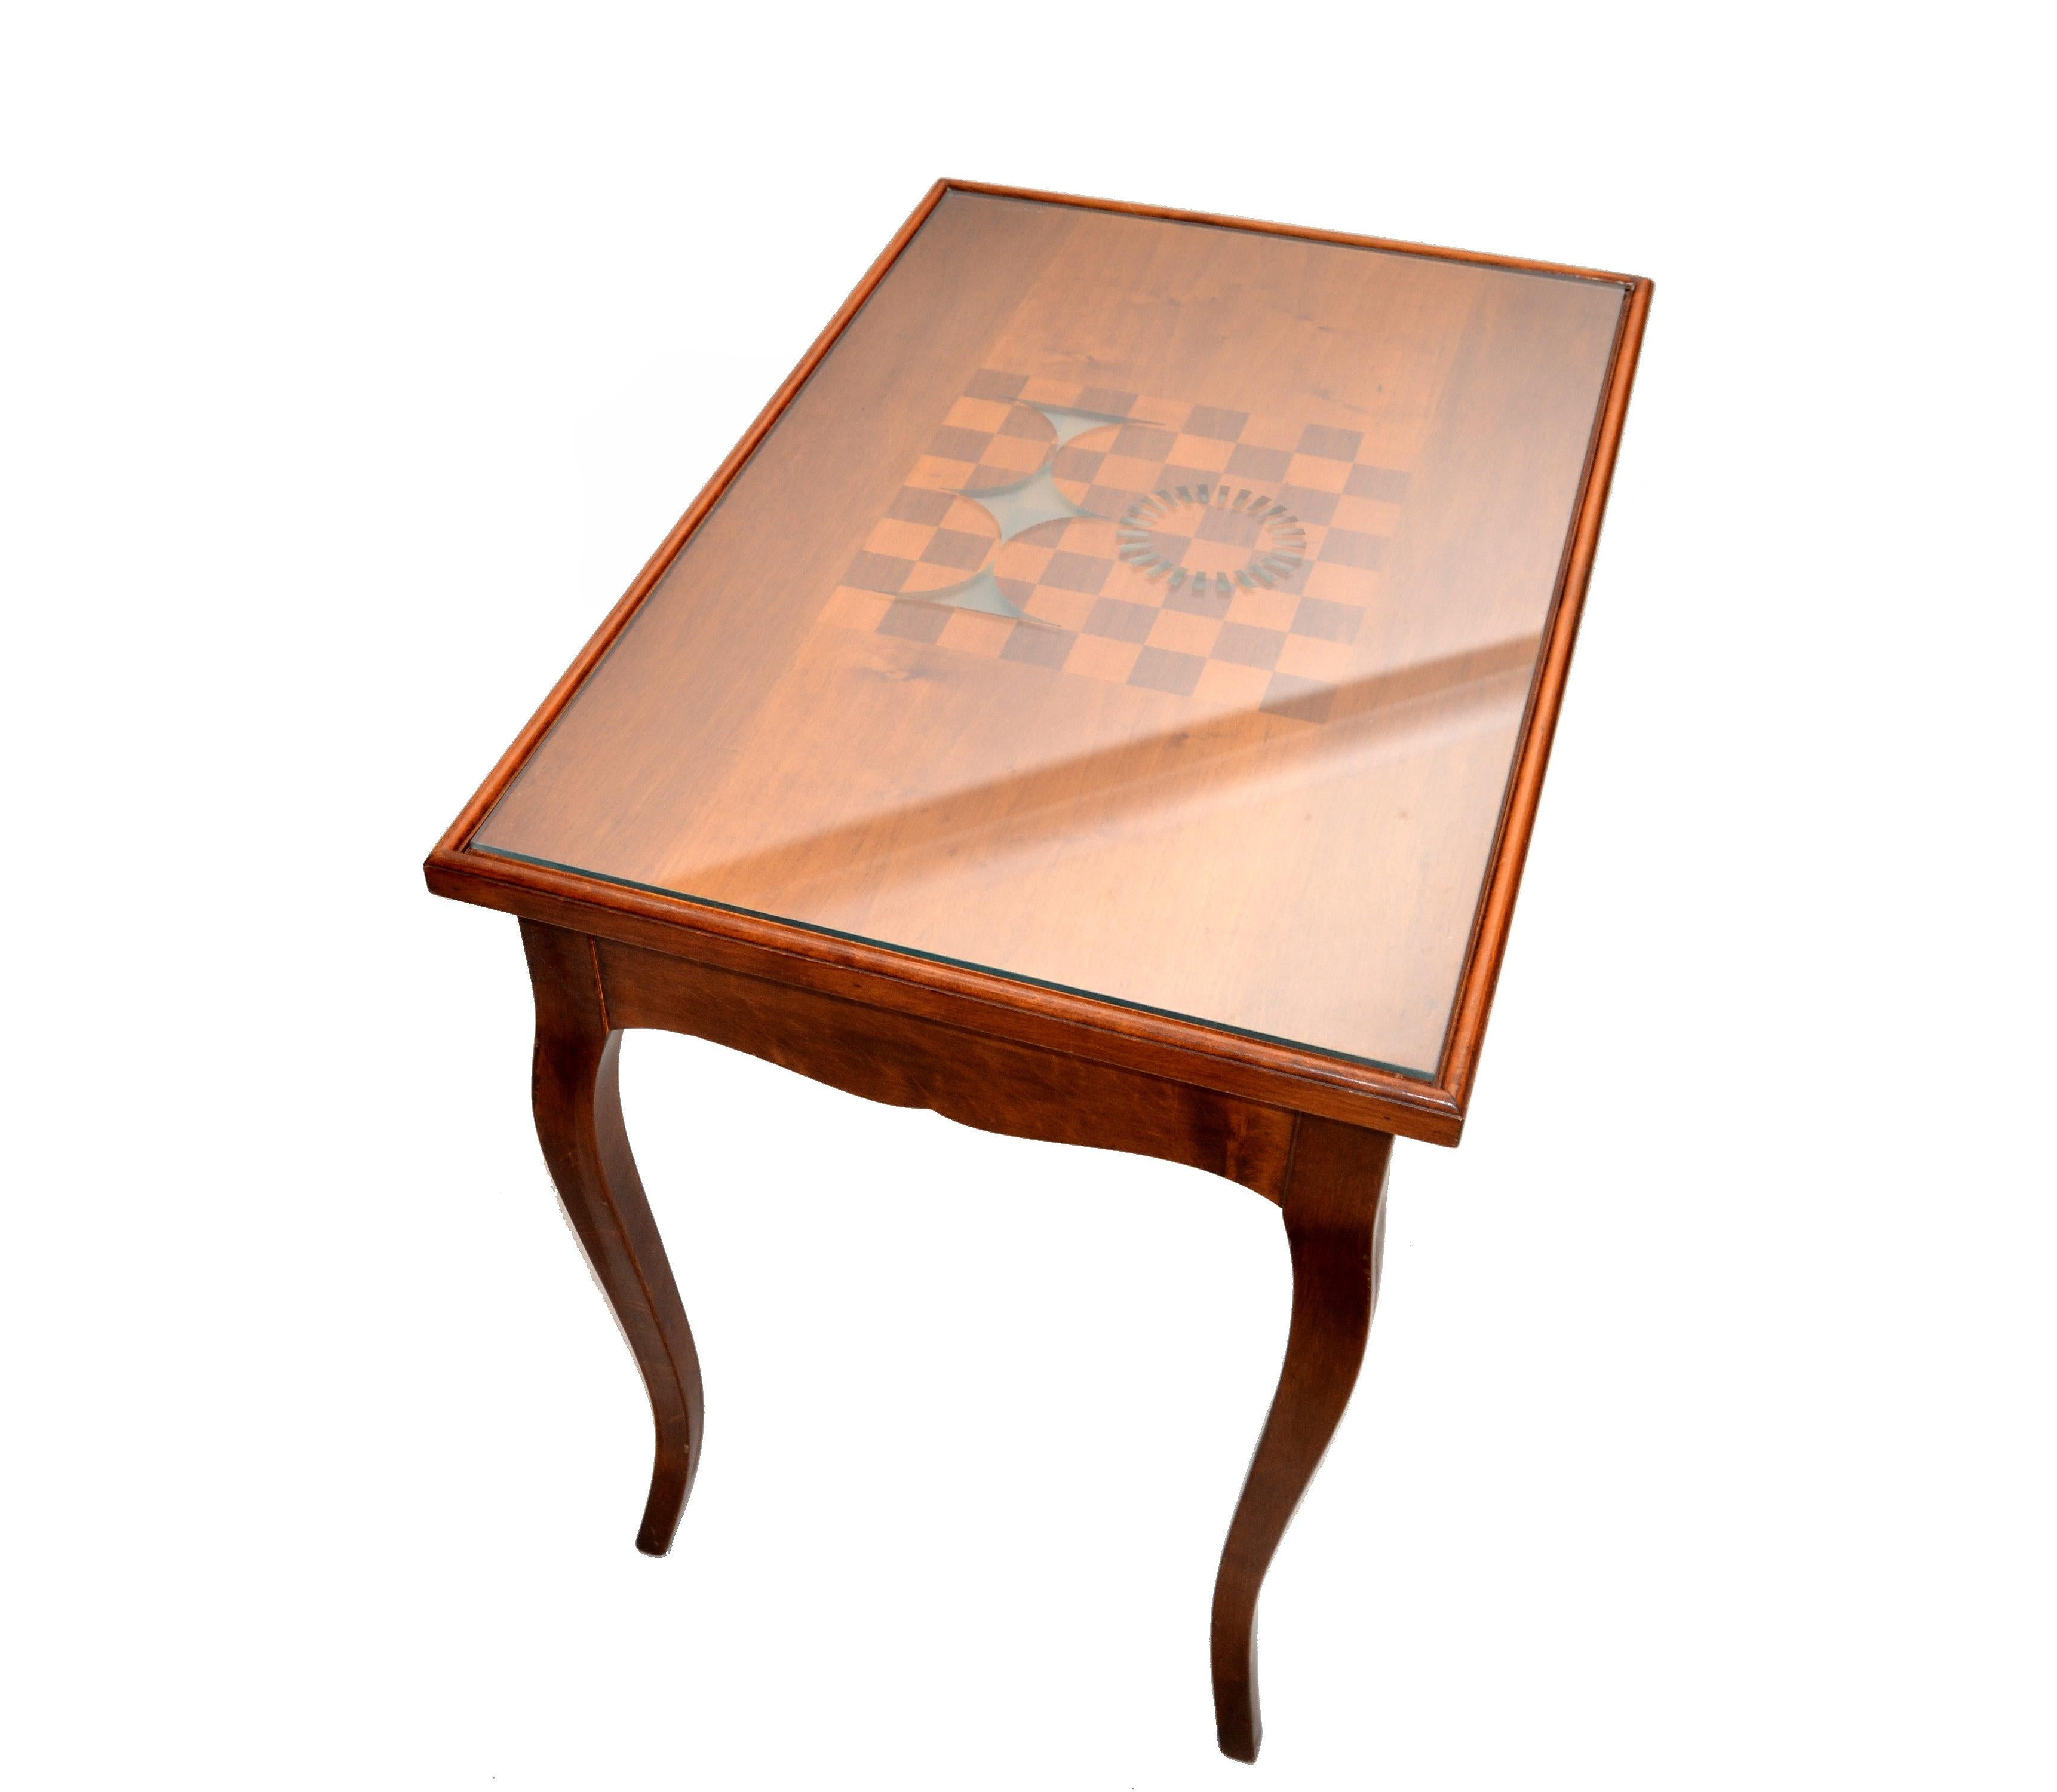 Mid-Century Modern reversible mahogany table into a chess or backgammon game table.
The top can be rotated into a chess game or taken off to play backgammon.
Legs and apron are hand-carved. Contains 2 pullout drawers for accessories. 
The